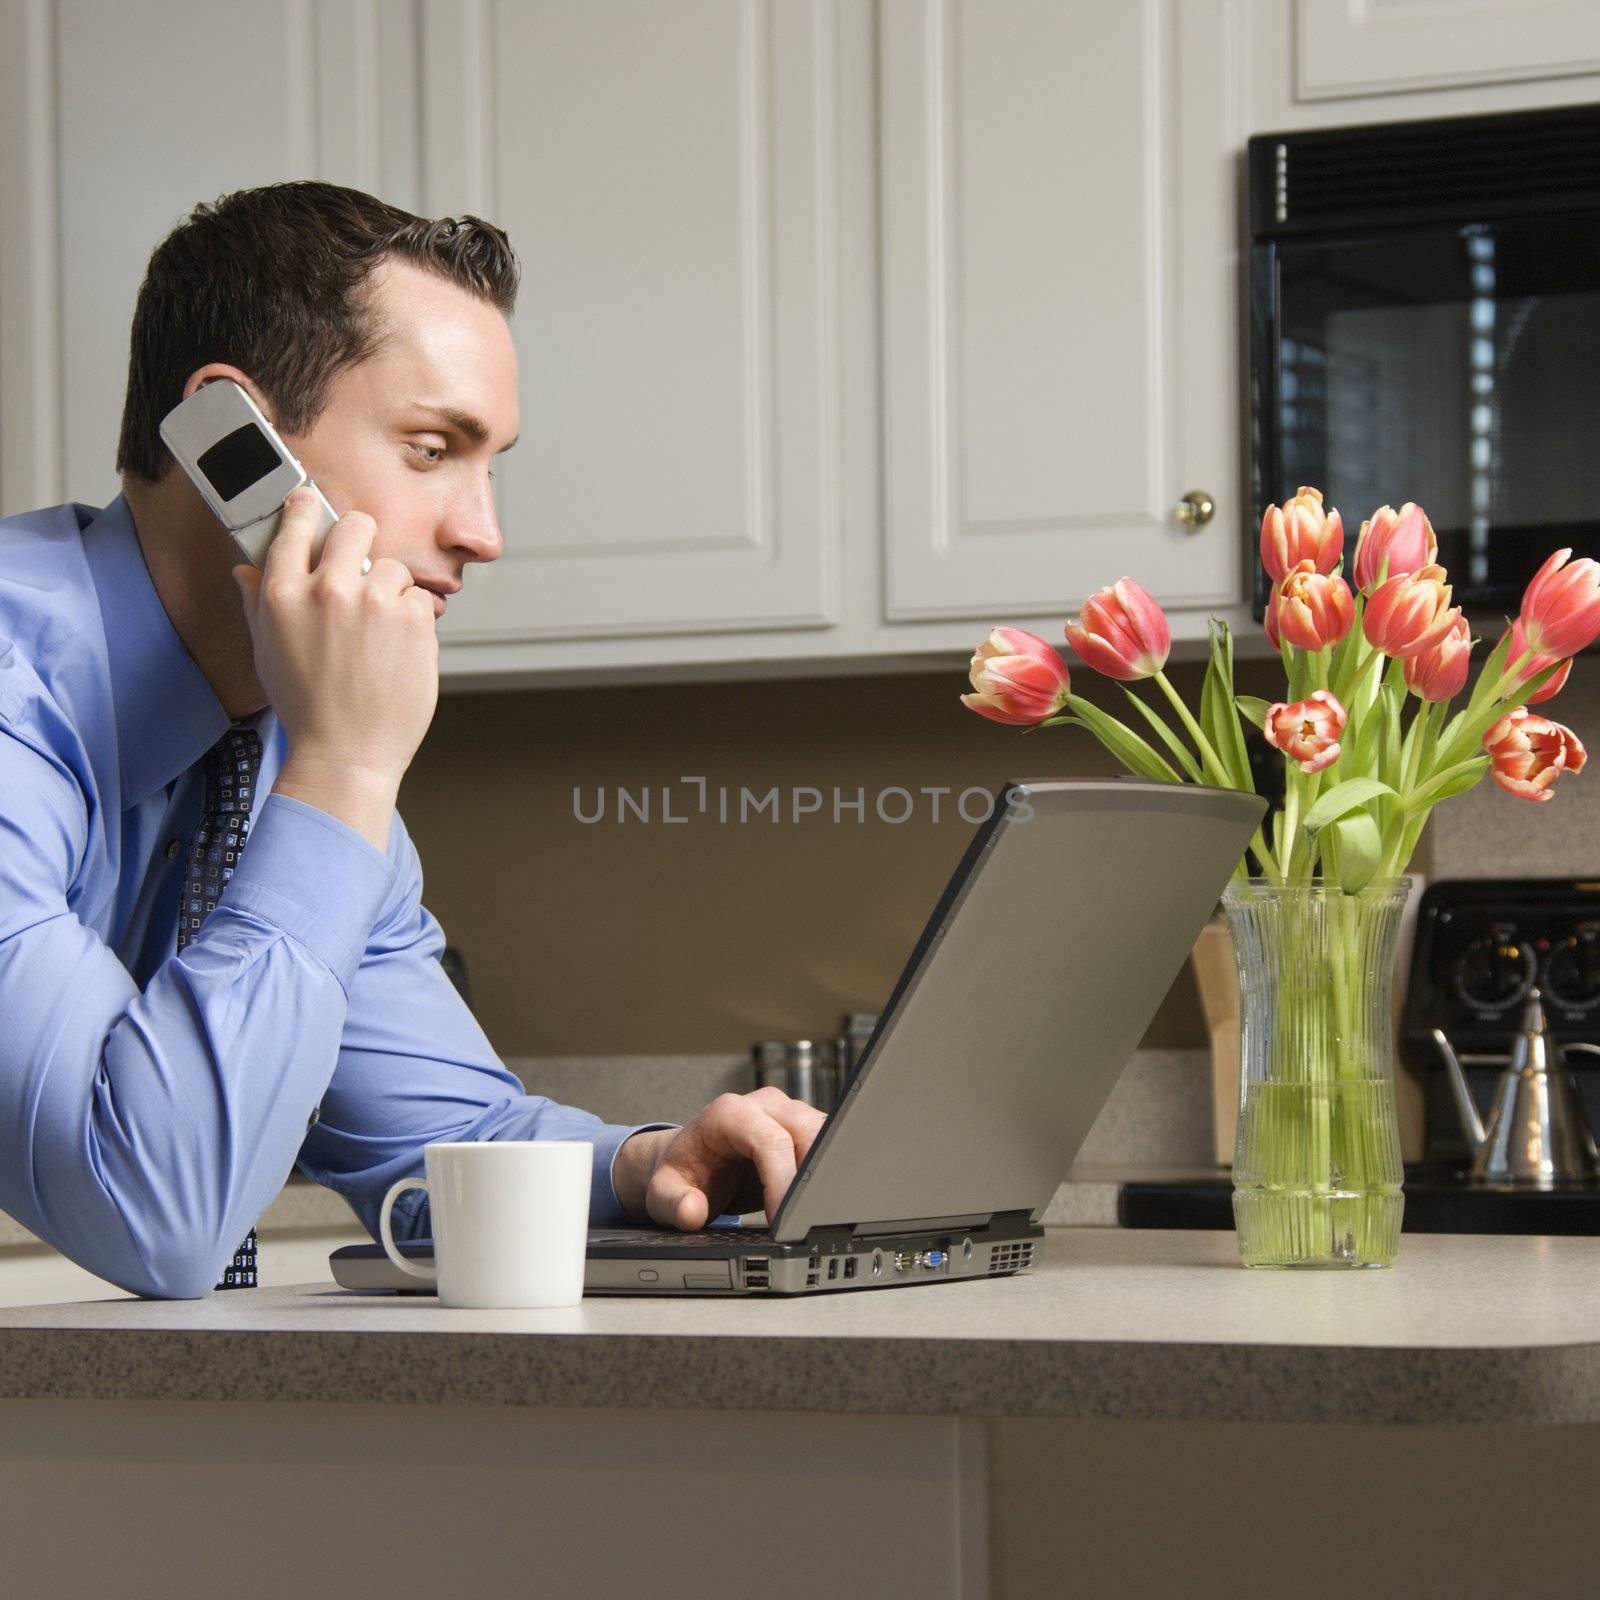 Caucasian man in suit using laptop computer and talking on cellphone in kitchen.